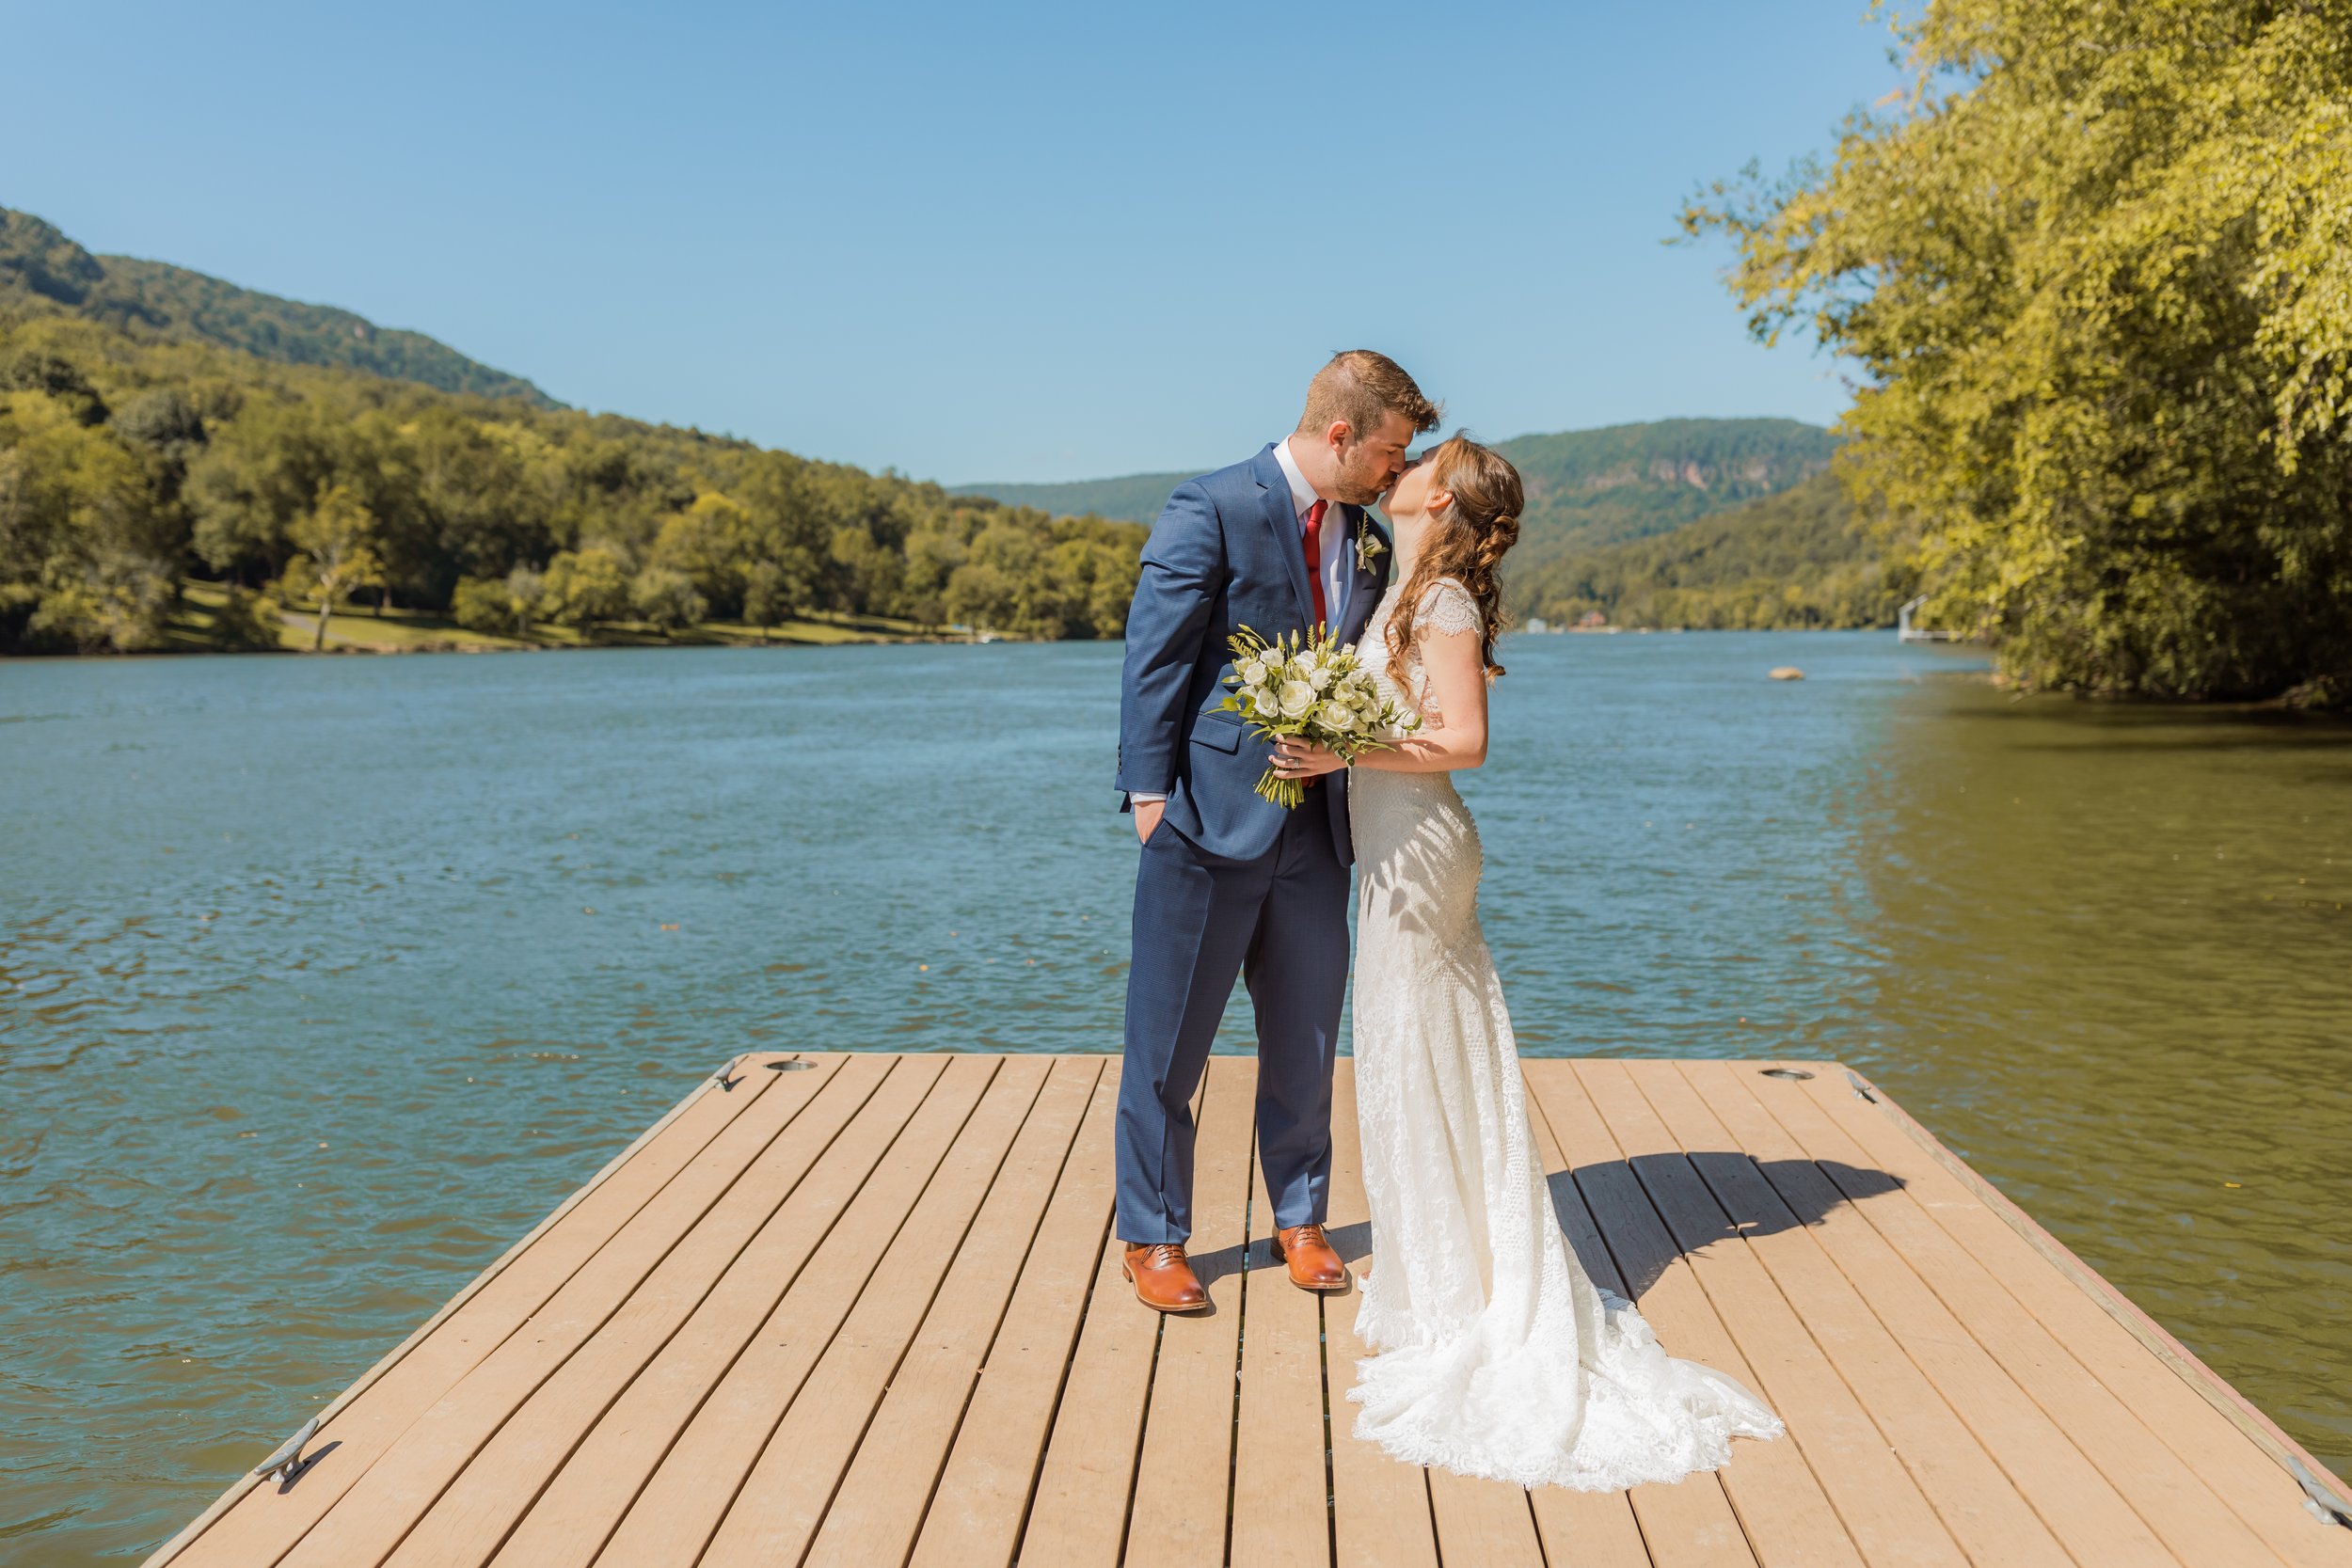 Elopement_Snoopers_Rock_Chattanooga_TN_Emily_Lester_Photography-96.jpg